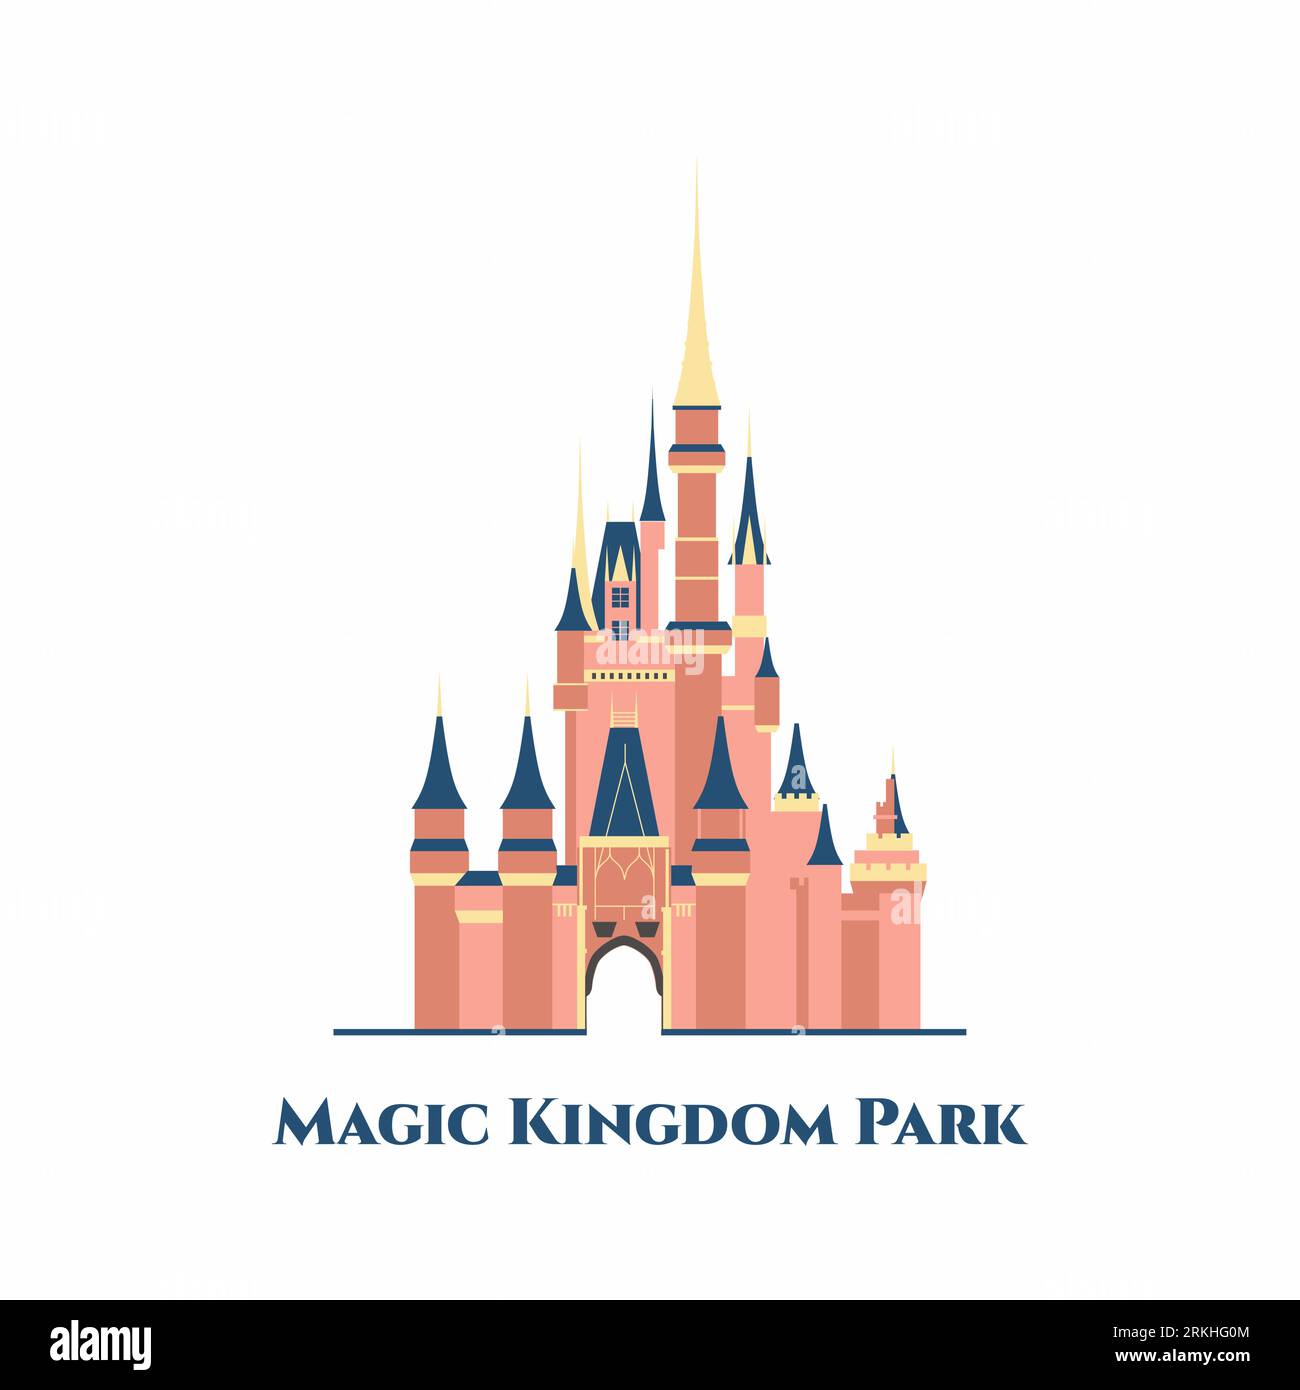 Magic Kingdom Park. It is a theme park at the Walt Disney World Resort in Bay Lake, Florida, near Orlando, Florida. Vector flat icon with the image of Stock Vector